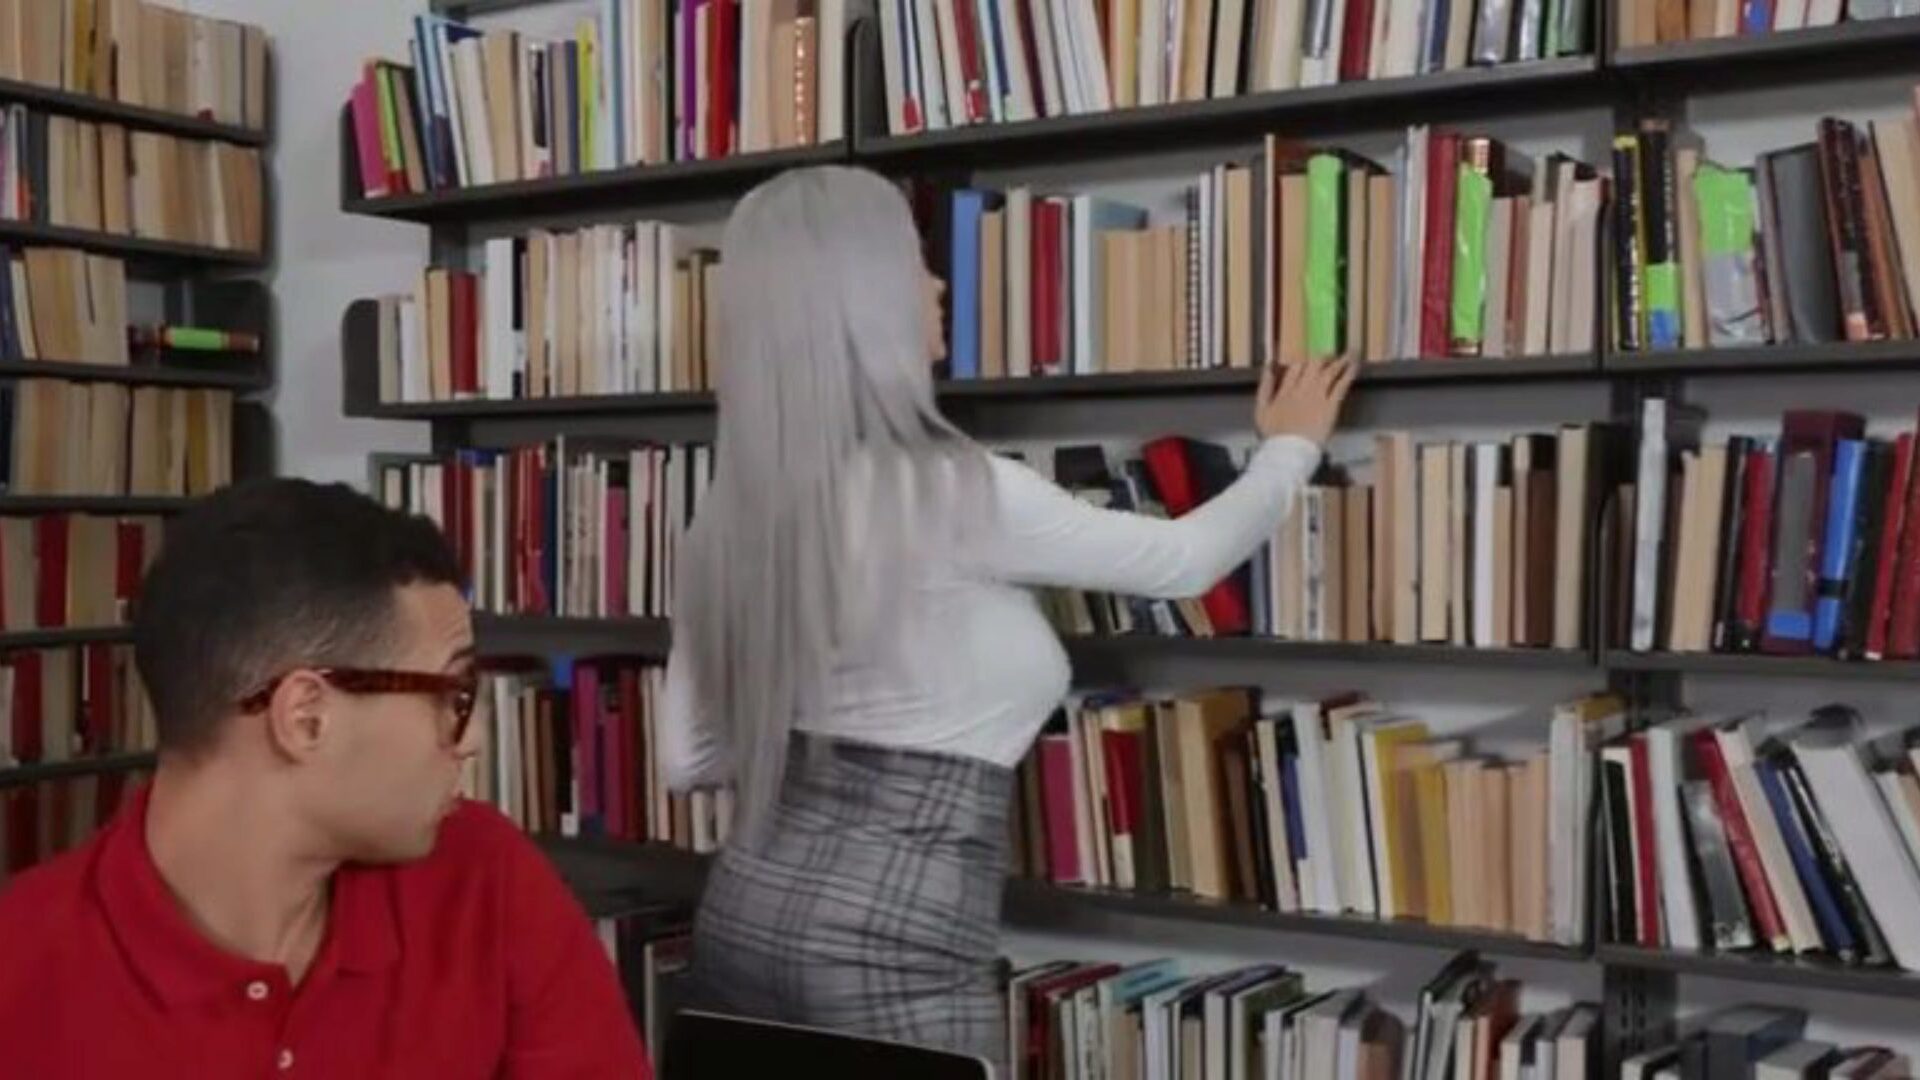 Biggest Naturals on White Haired Nerd Library Fanatic As we all know everyone who showcases up at a library is a Fanatic and a Total Nerd, which is why it was kinda surprising to watch this chick go full-on slut during the time that there!